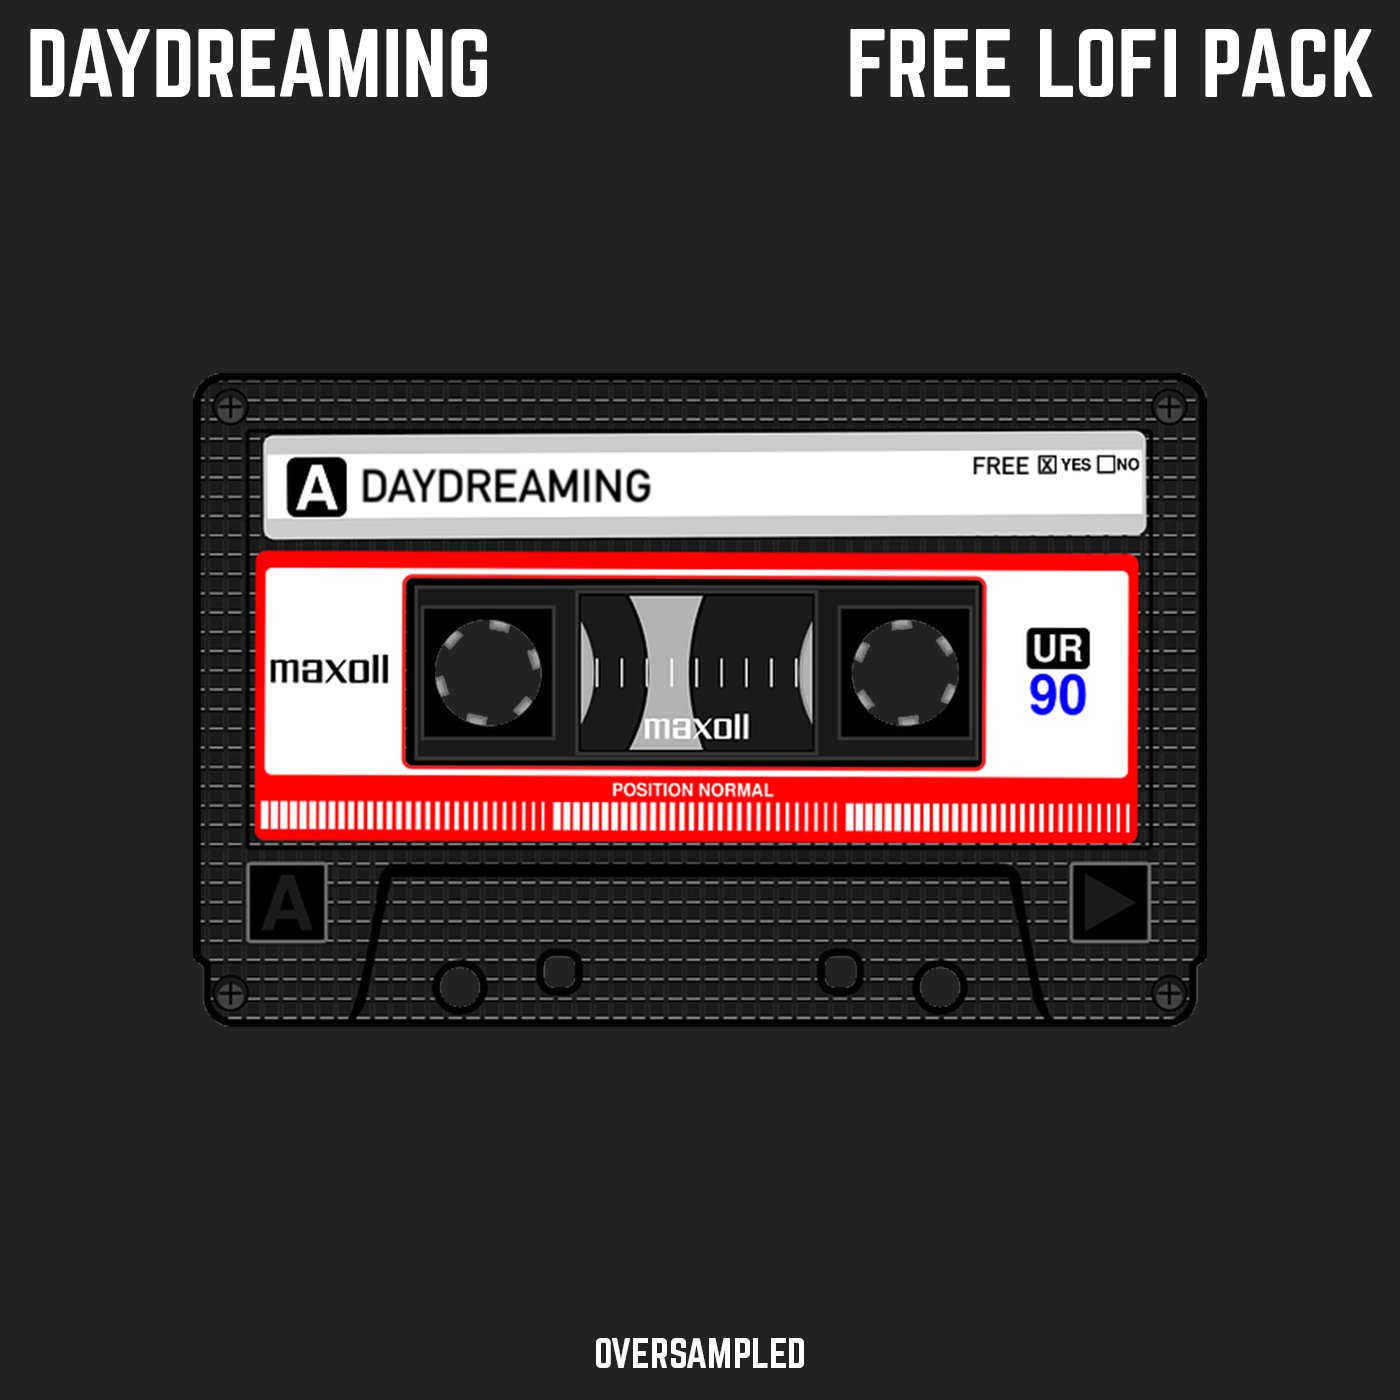 [FREE] DAYDREAMING - An Ultimate Lo-fi StarterKit - Oversampled